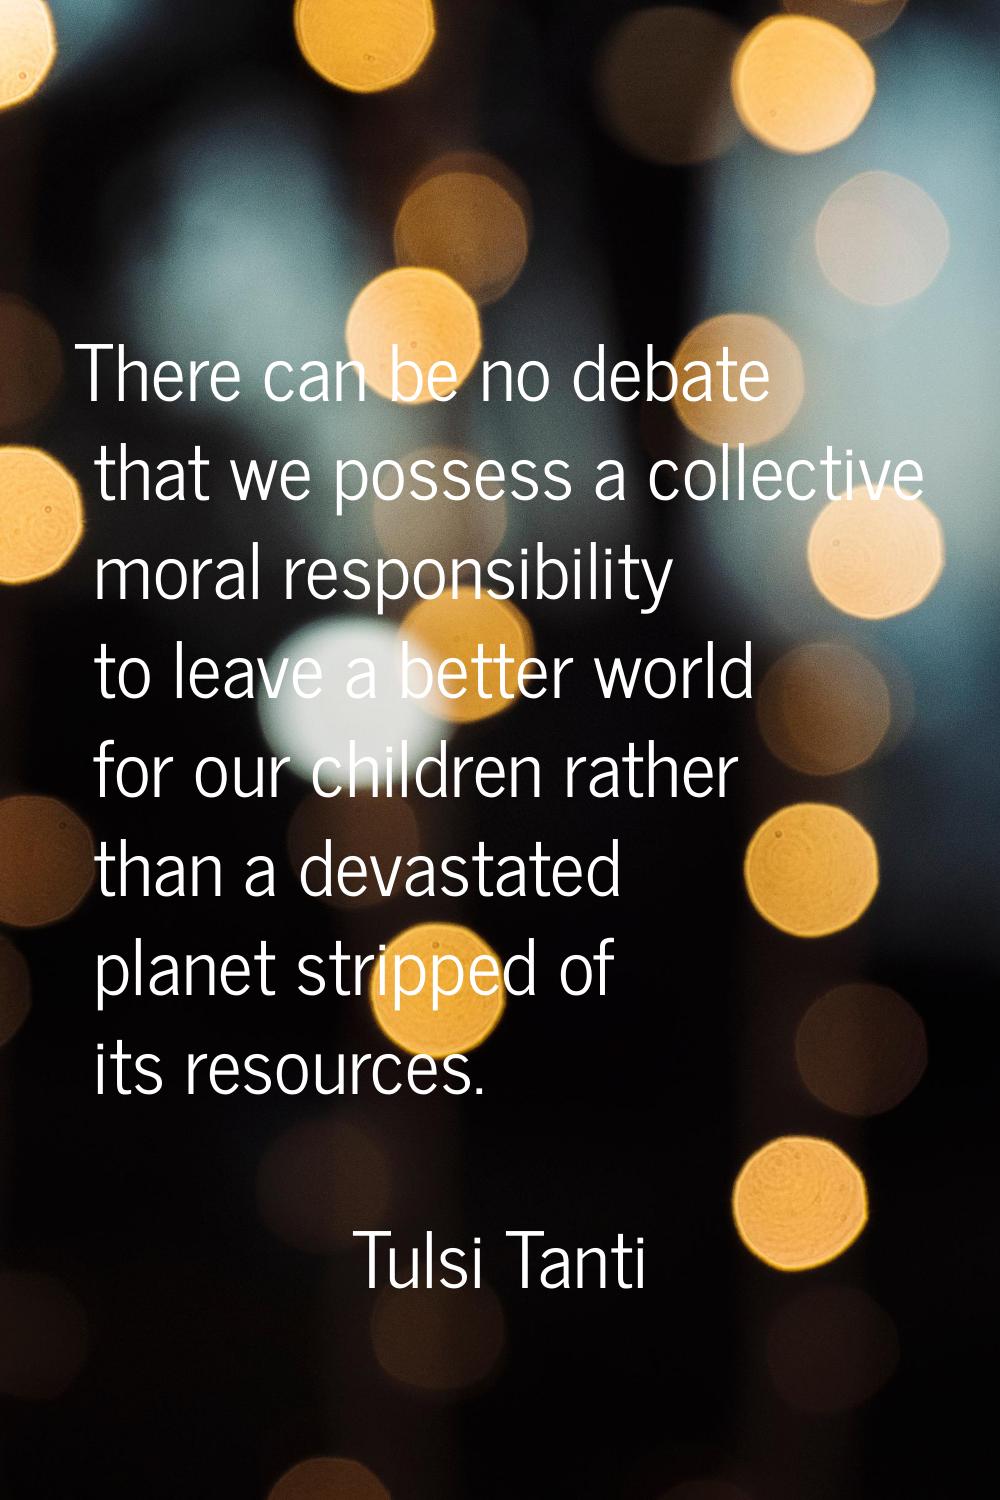 There can be no debate that we possess a collective moral responsibility to leave a better world fo